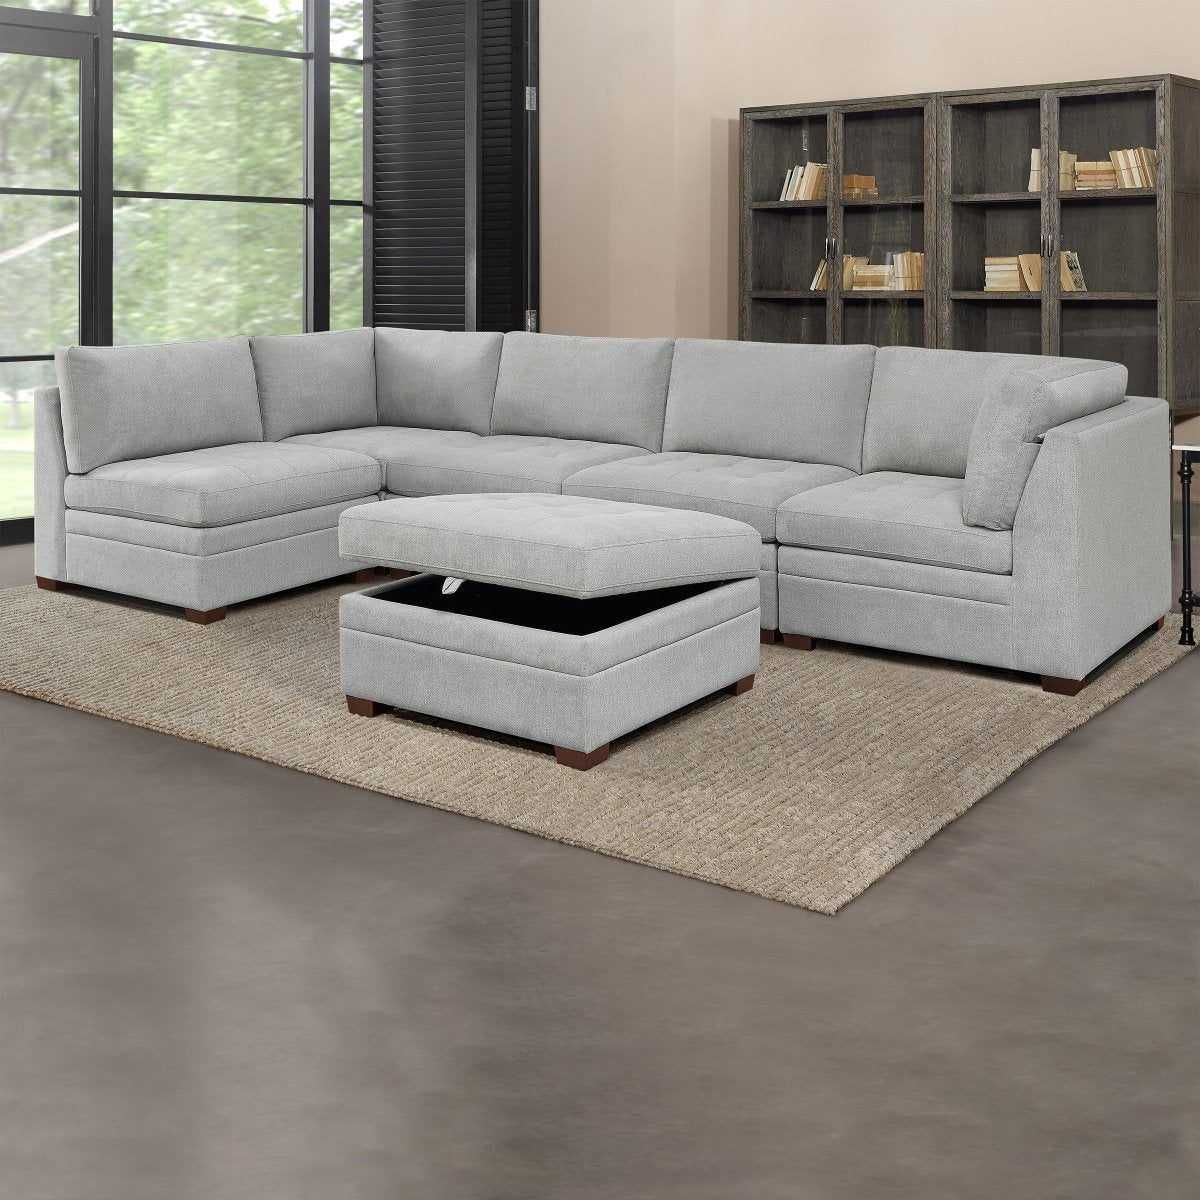 Thomasville Tisdale Fabric Sectional with Storage Ottoman - Alpine Outlets